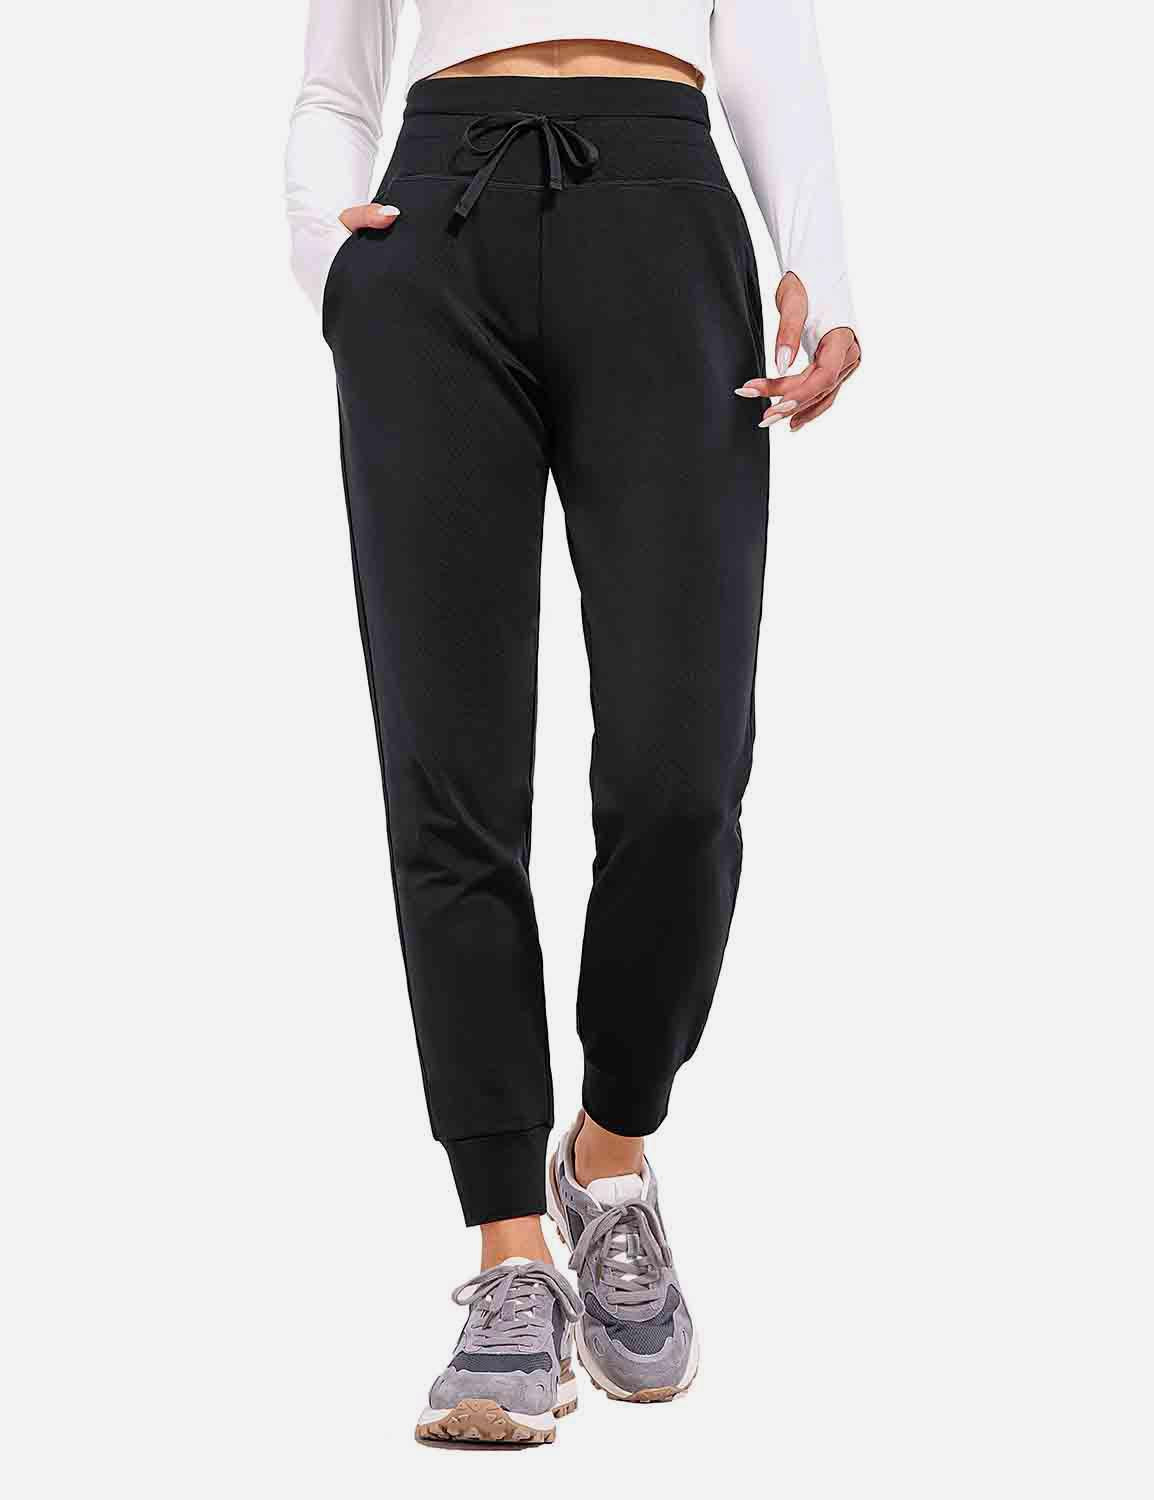 BALEAF Women's Sweatpants Joggers Cotton Yoga Lounge Sweat Pants Casual  Running Tapered Pants with Pockets Black Size XXXL 